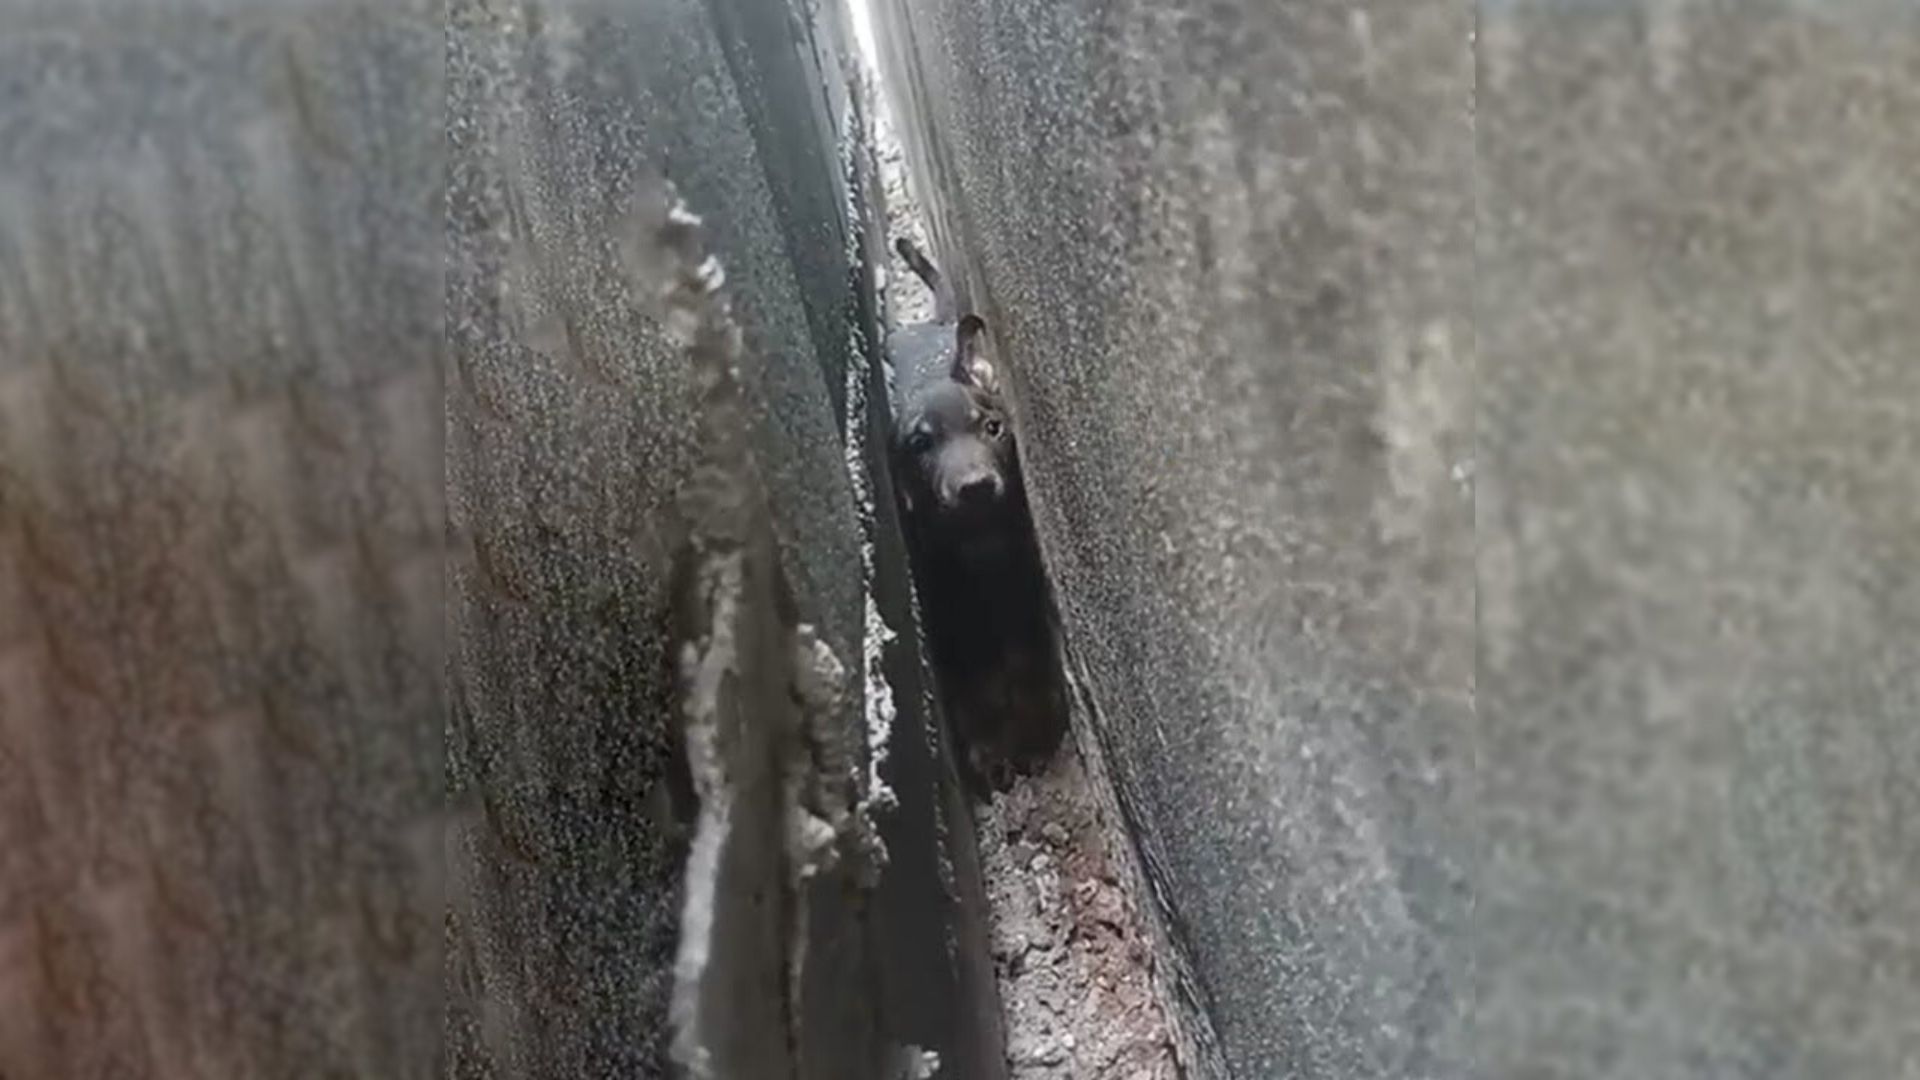 People Heard Noise Coming Between 2 Walls And Were Shocked By What They Found There